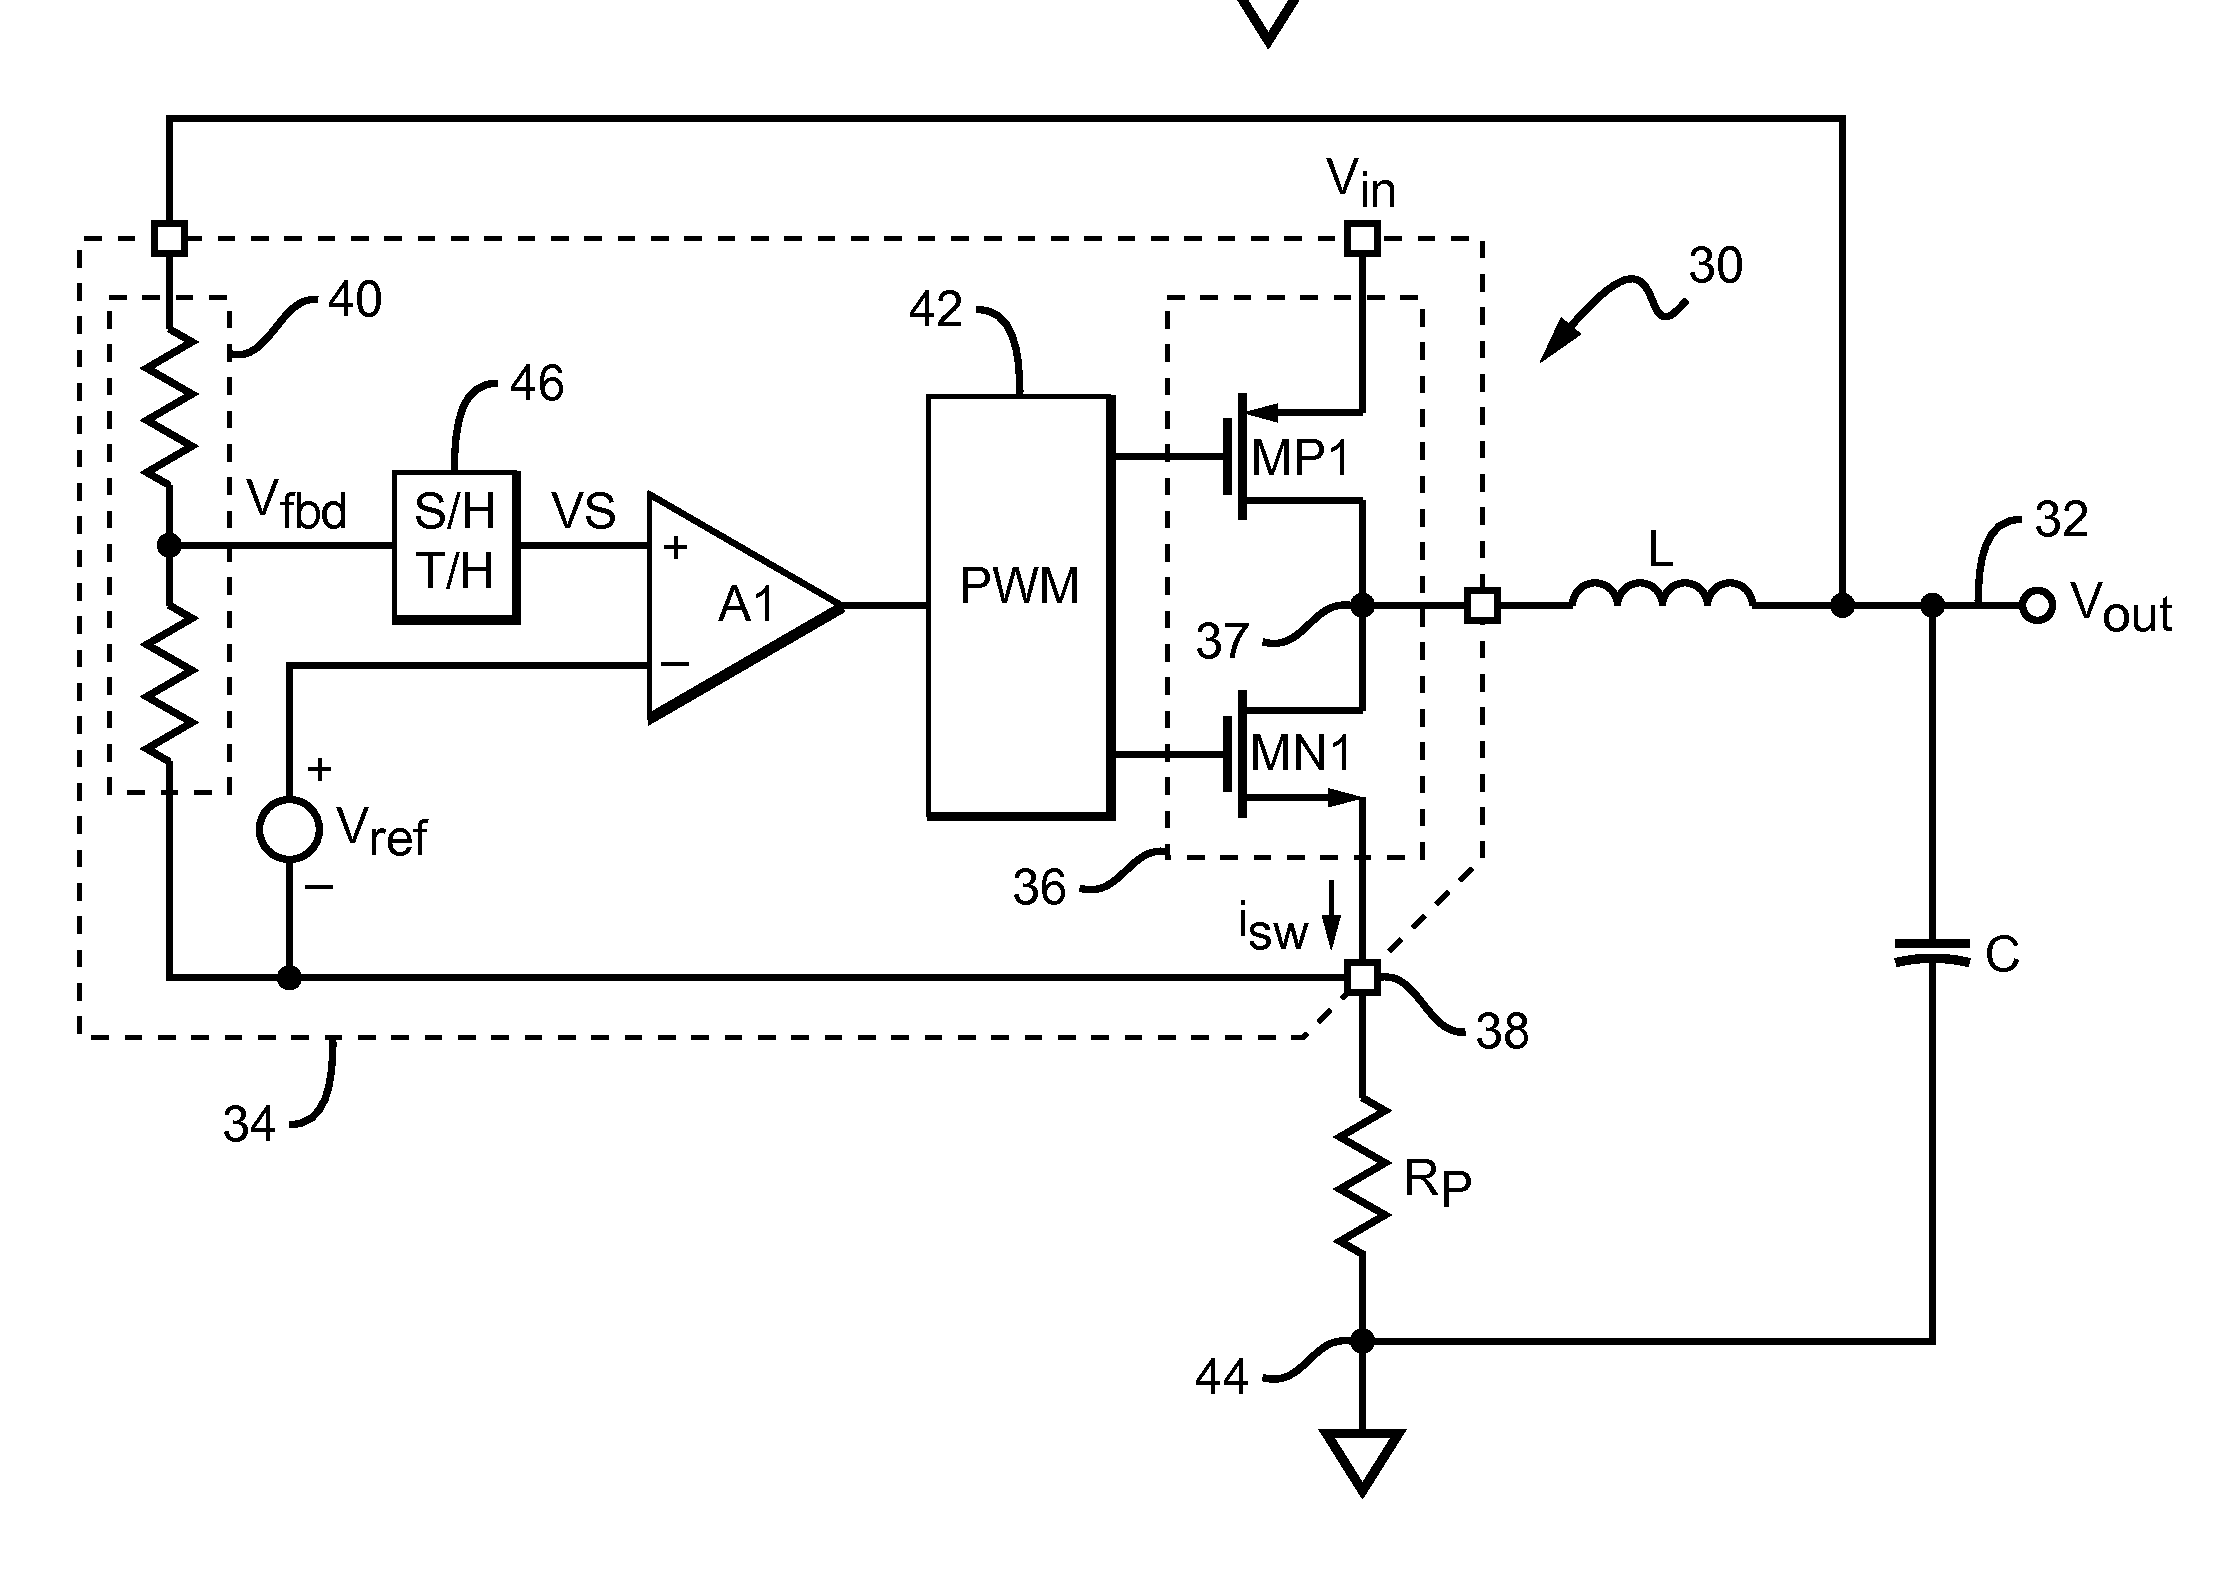 Switching power supply controller with selective feedback sampling and waveform approximation